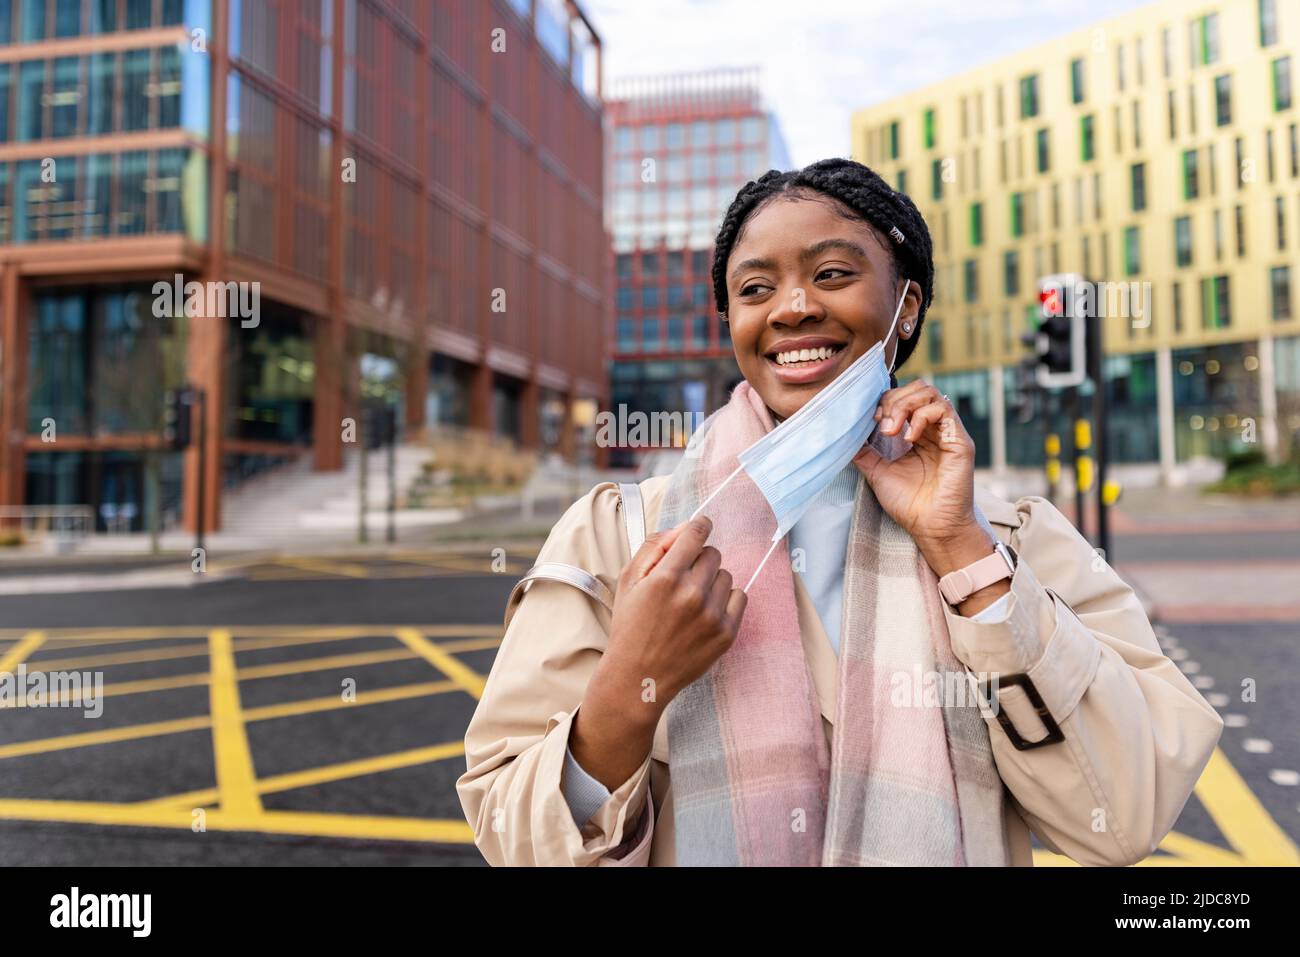 Cheerful woman in city centre taking off face covering, smiling and looking away Stock Photo